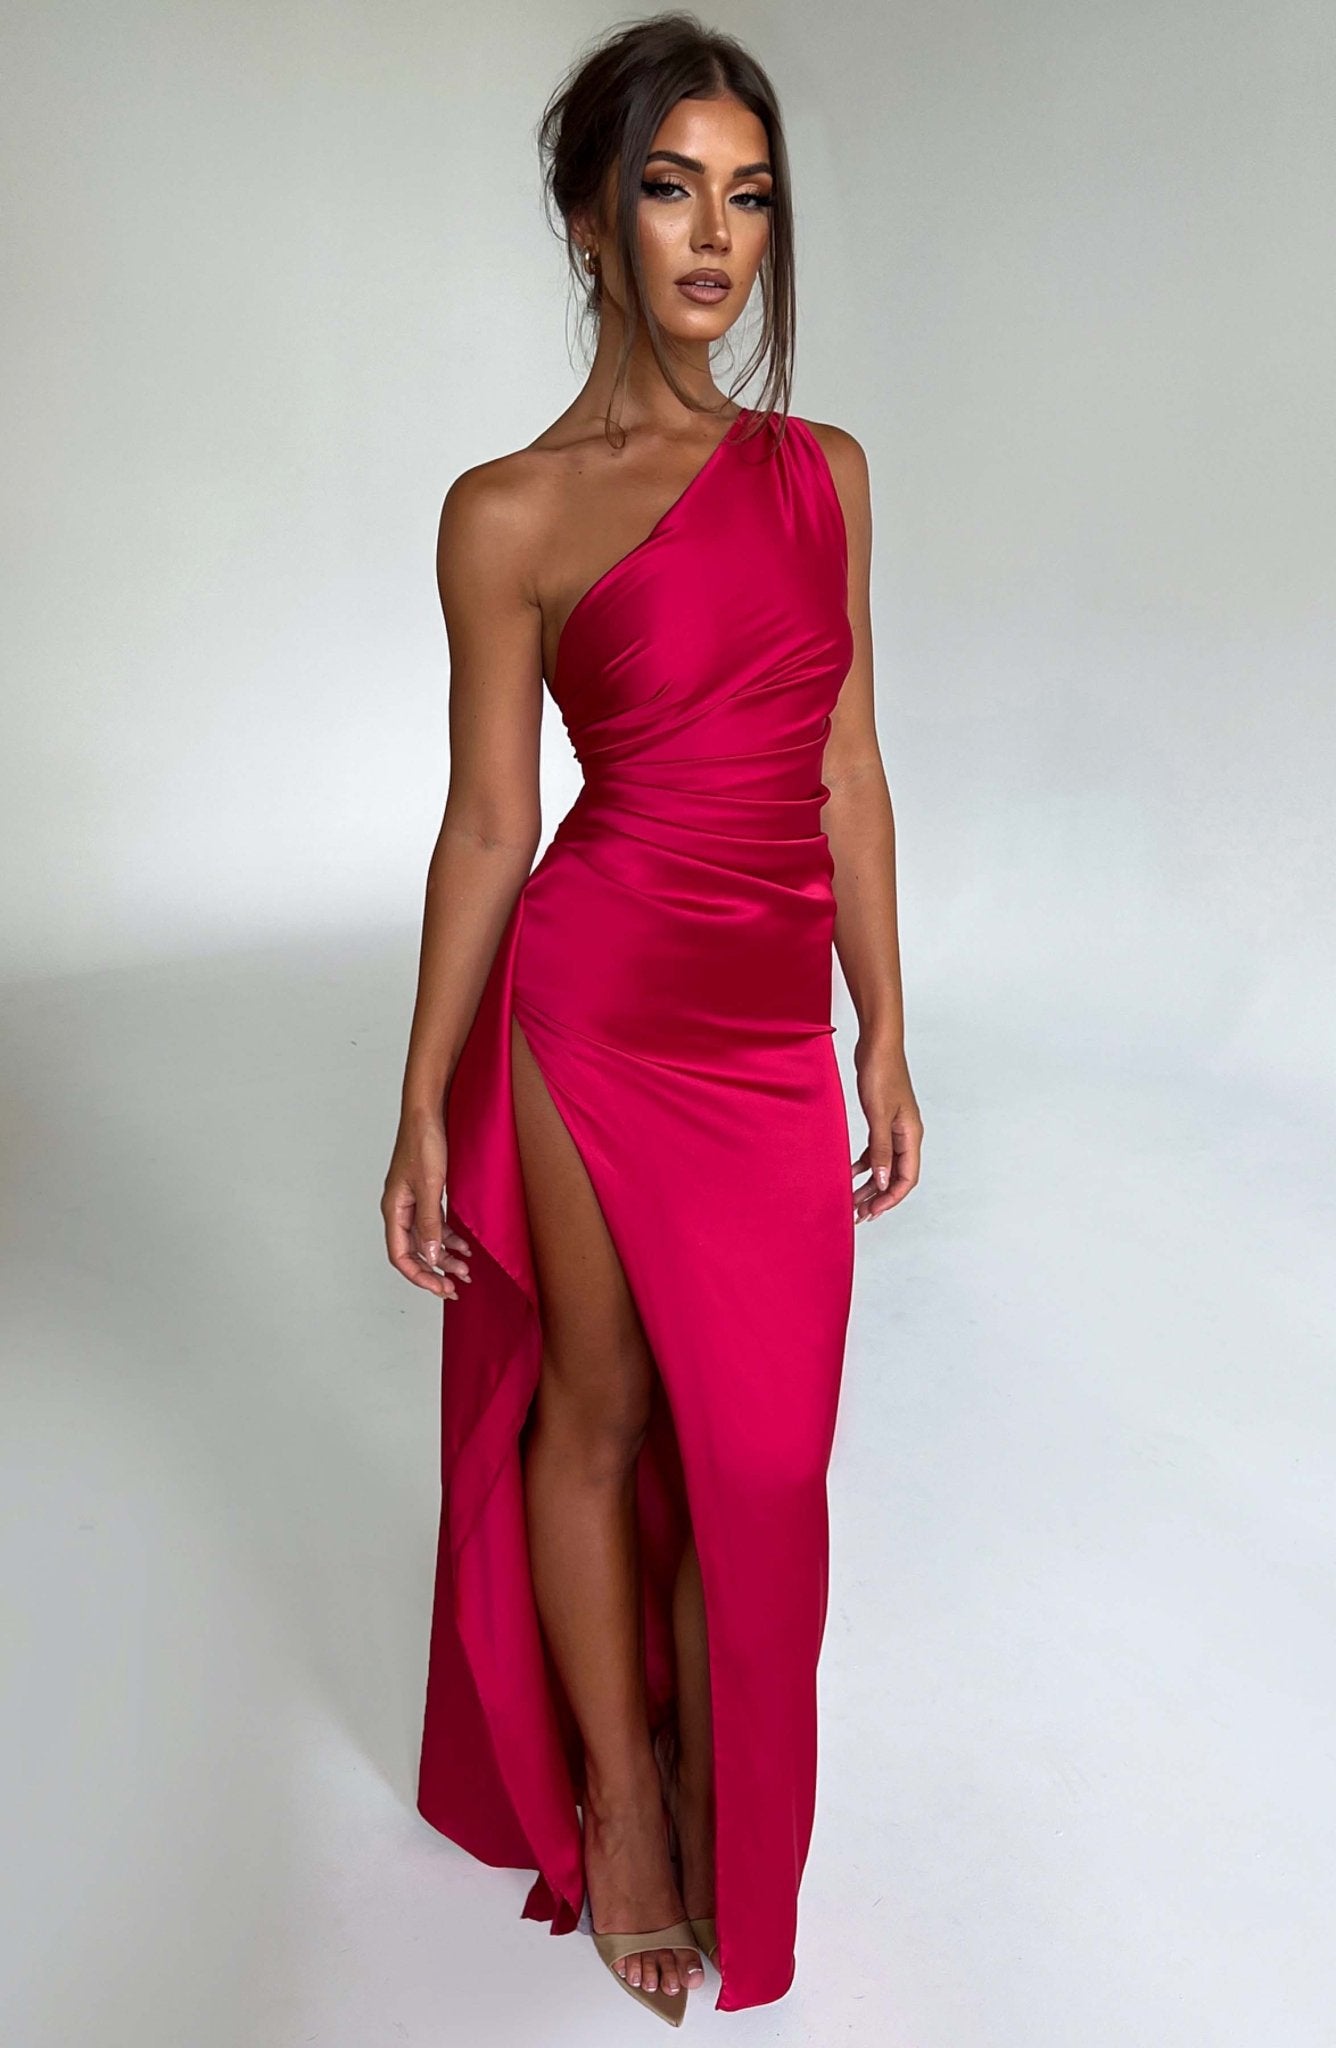 Pink Formal Dresses: The Ultimate Guide to Choosing the Perfect Gown